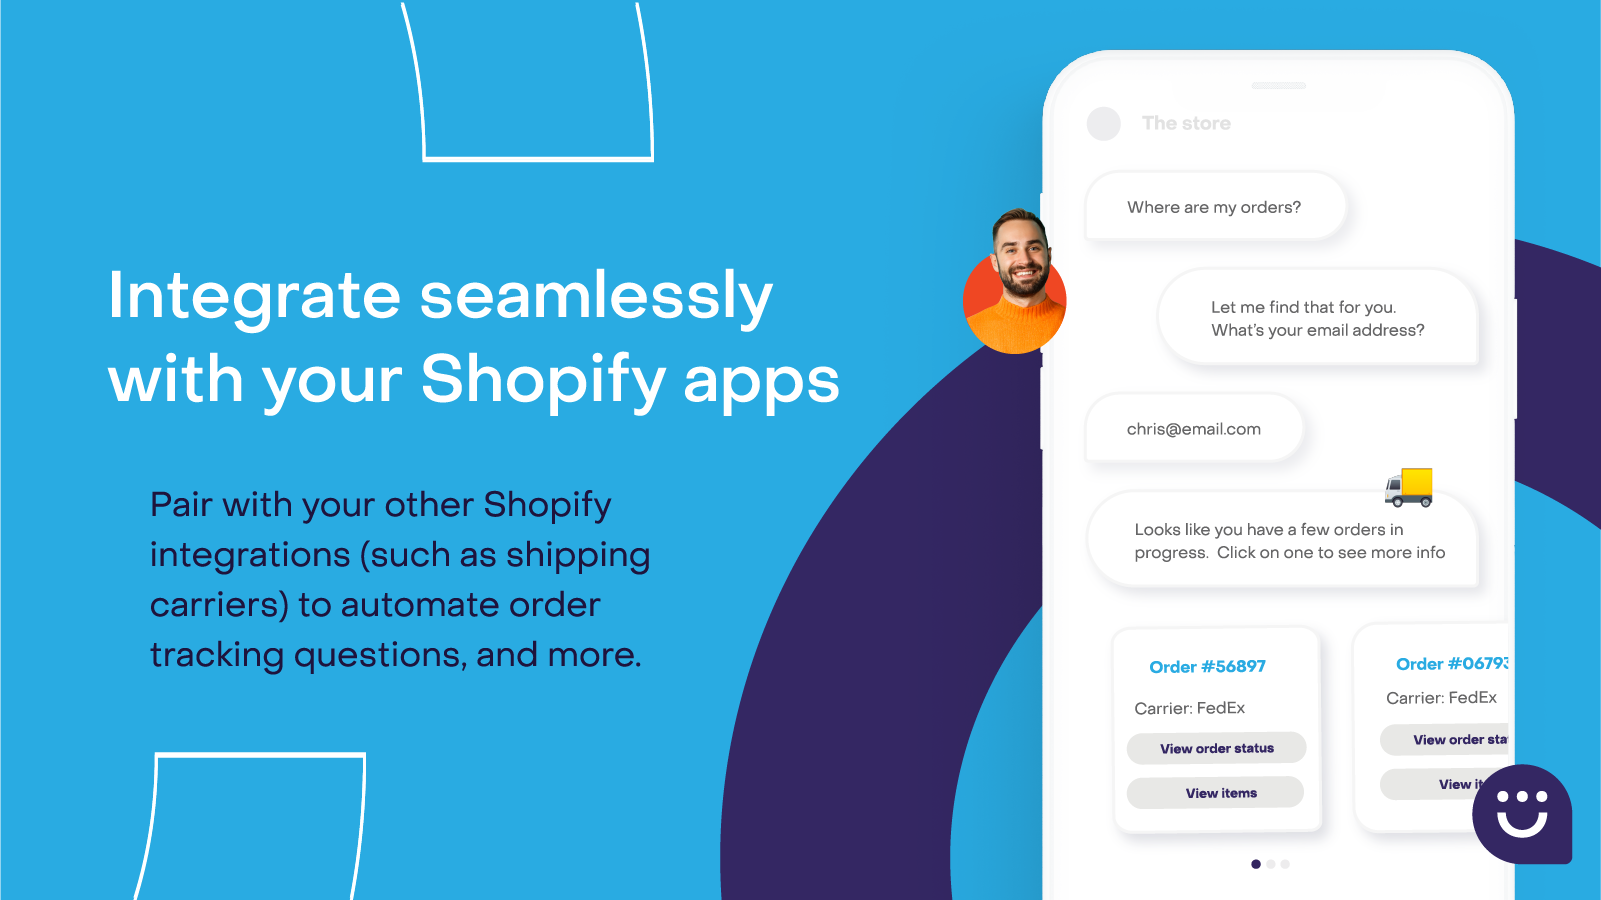 Pair with your other Shopify integrations (such as shipping carriers) to automate order tracking questions, and more.